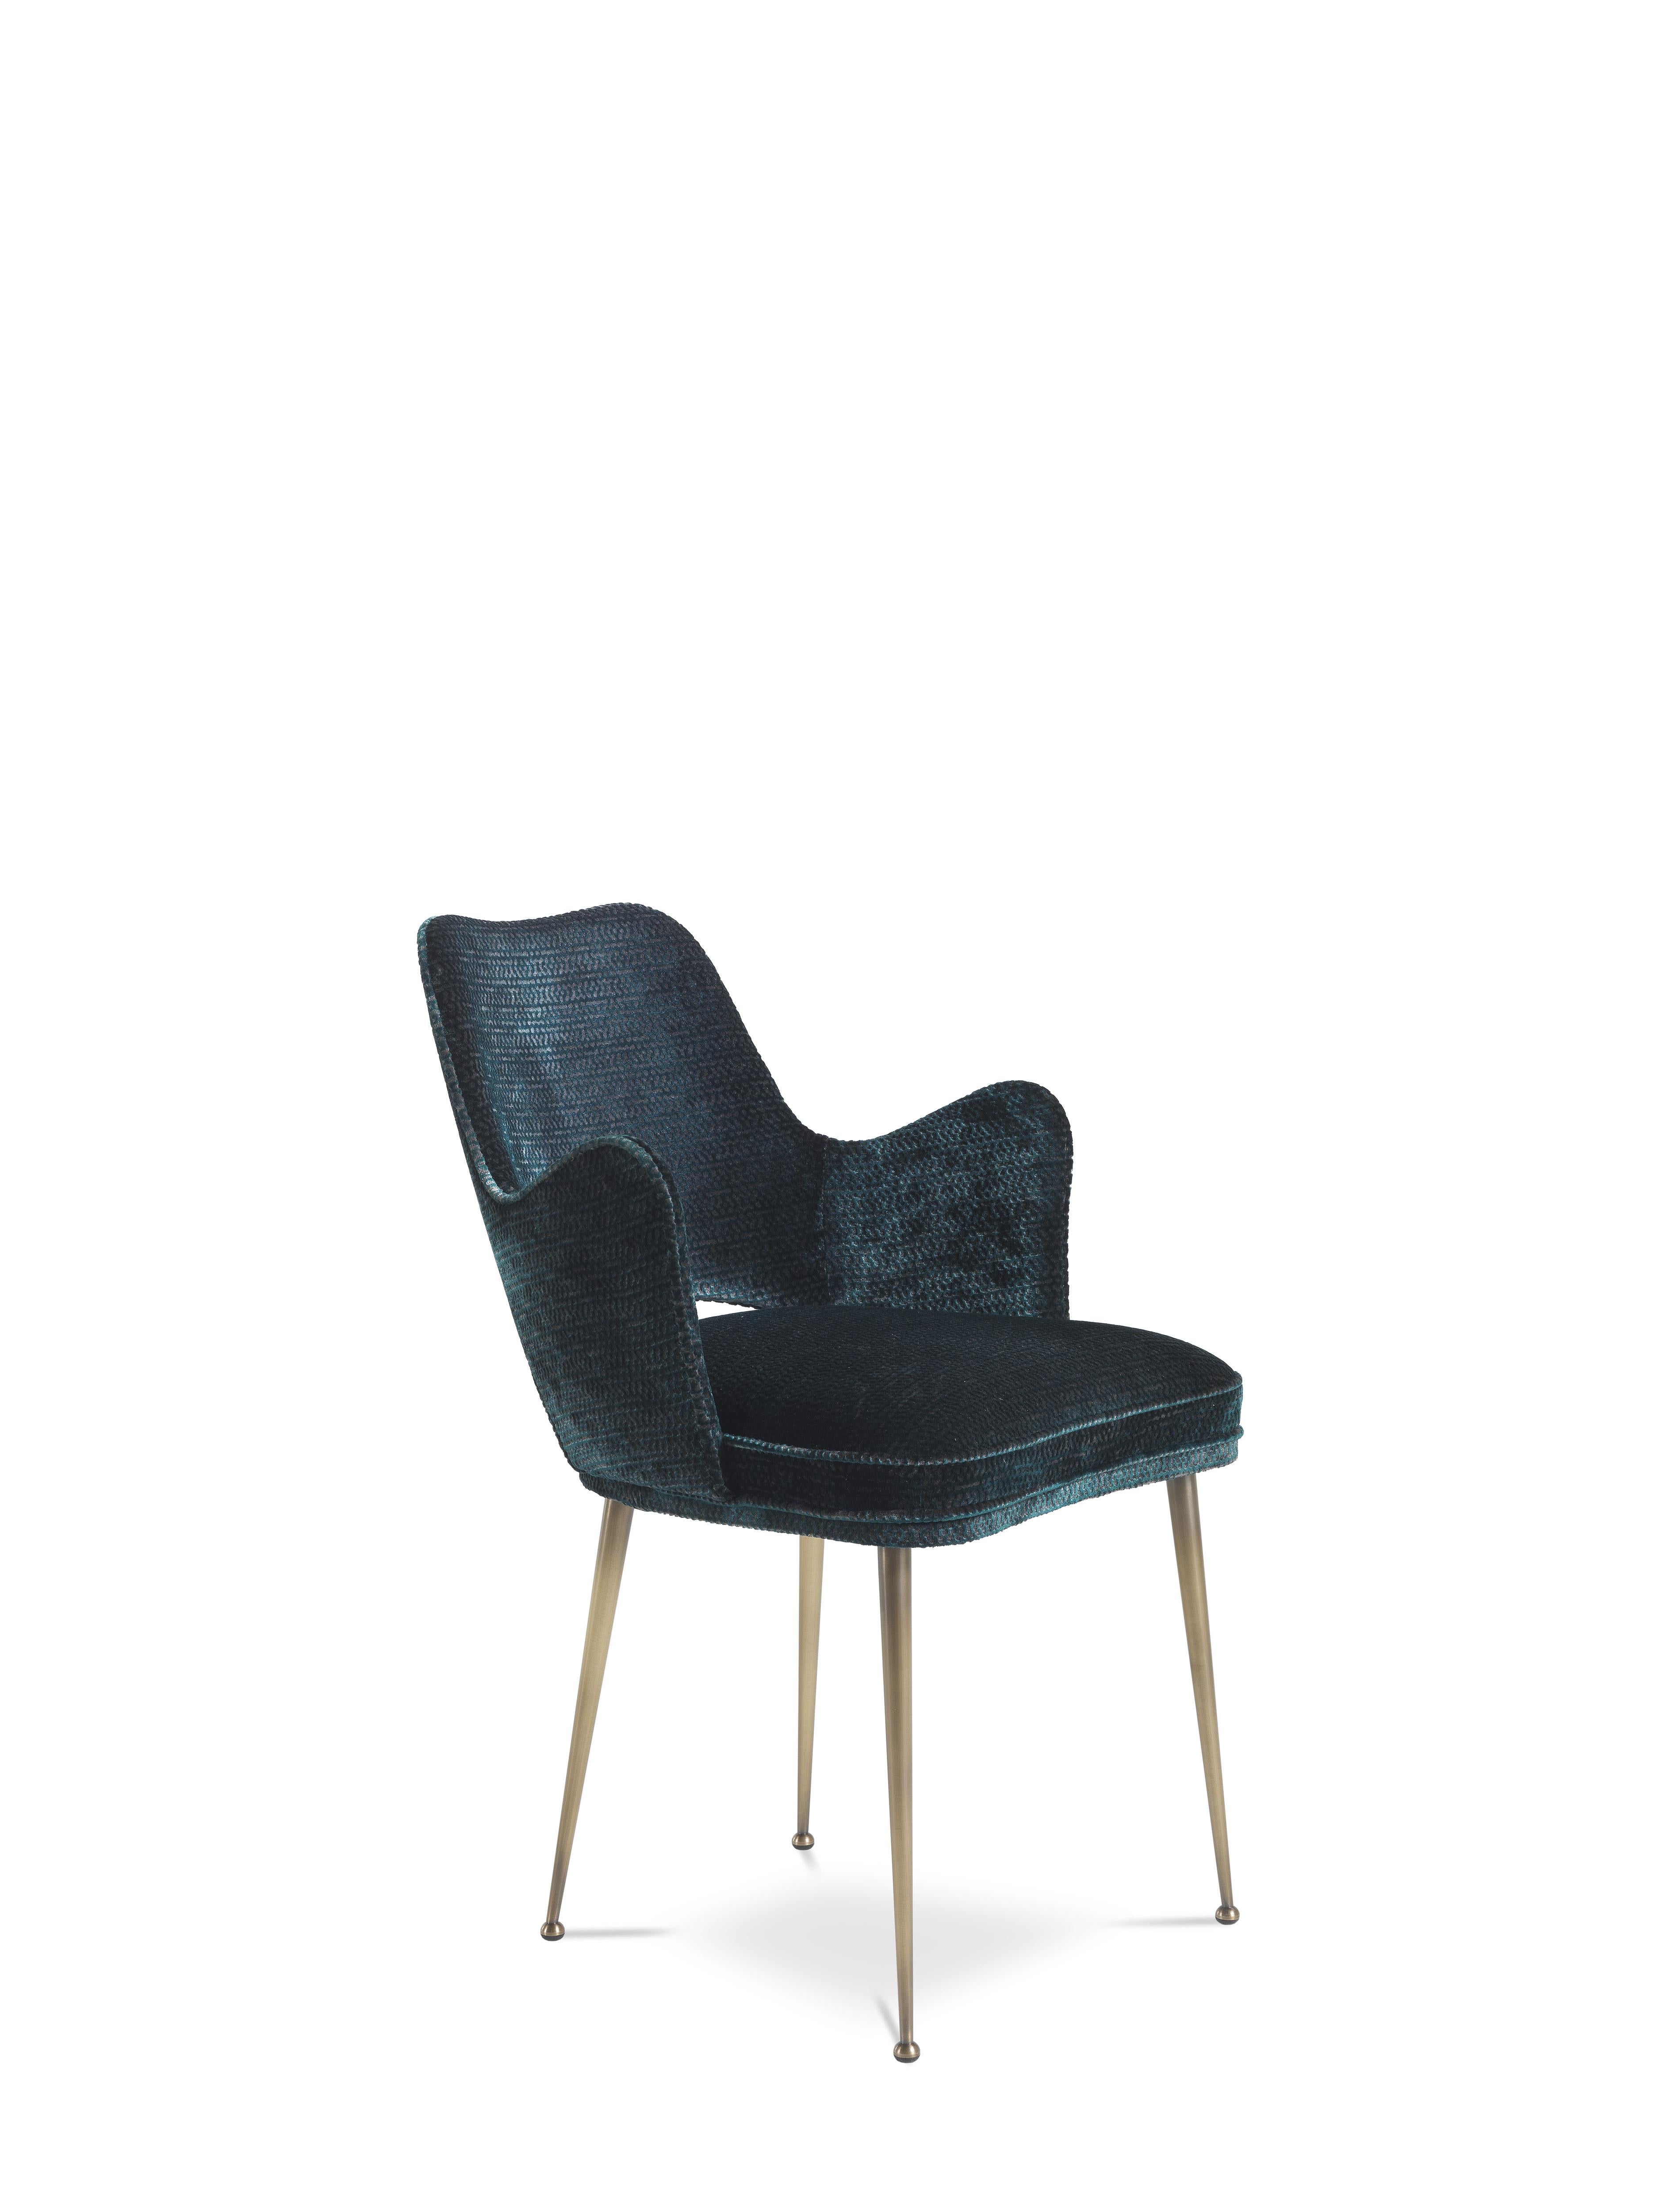 A chair with armrests able to harmoniously combine comfort and elegance. Featuring an original and light design, it has thin brass legs with feet, inspired by the 1950s. The possibility to choose among different upholstery makes McAdam a